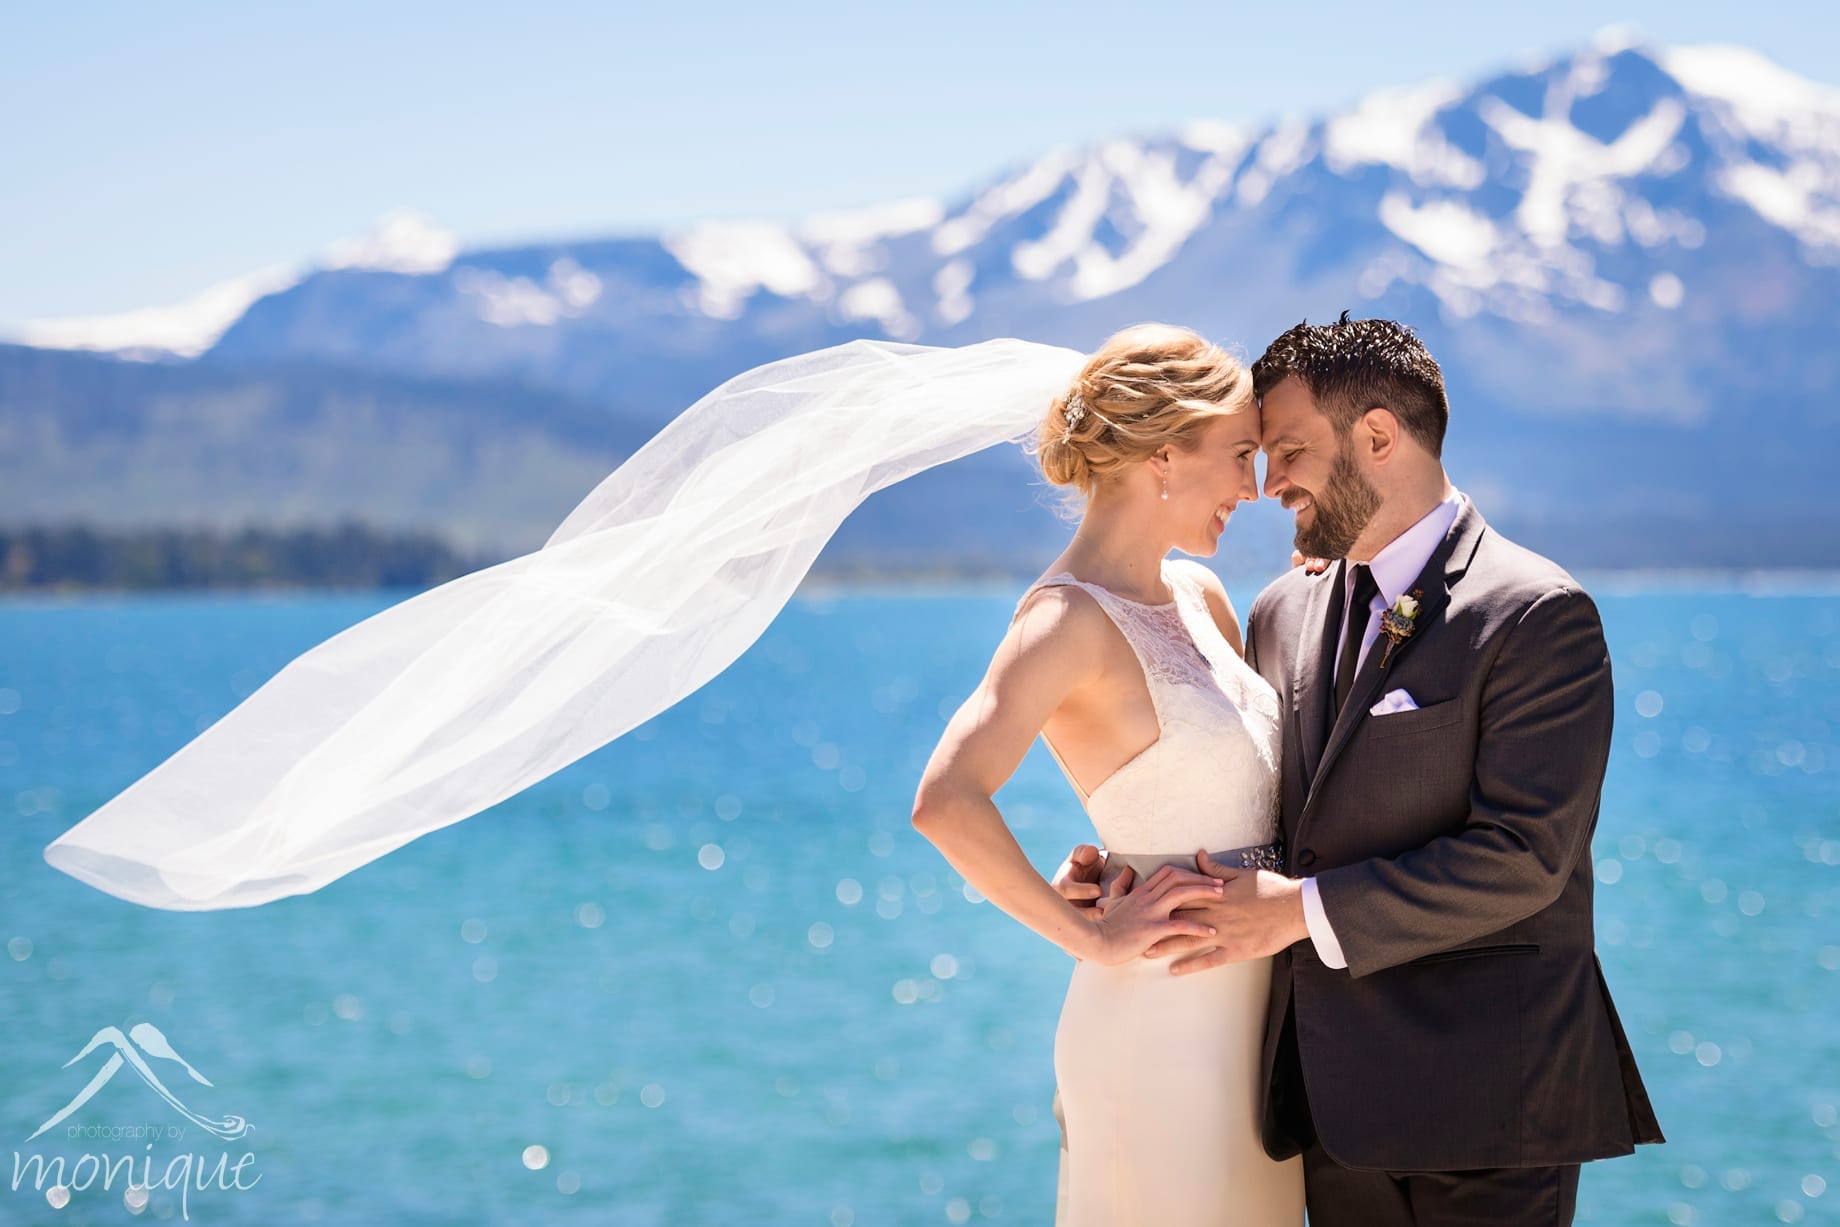 Edgewood Tahoe wedding photography with Mt. Tallac in the background